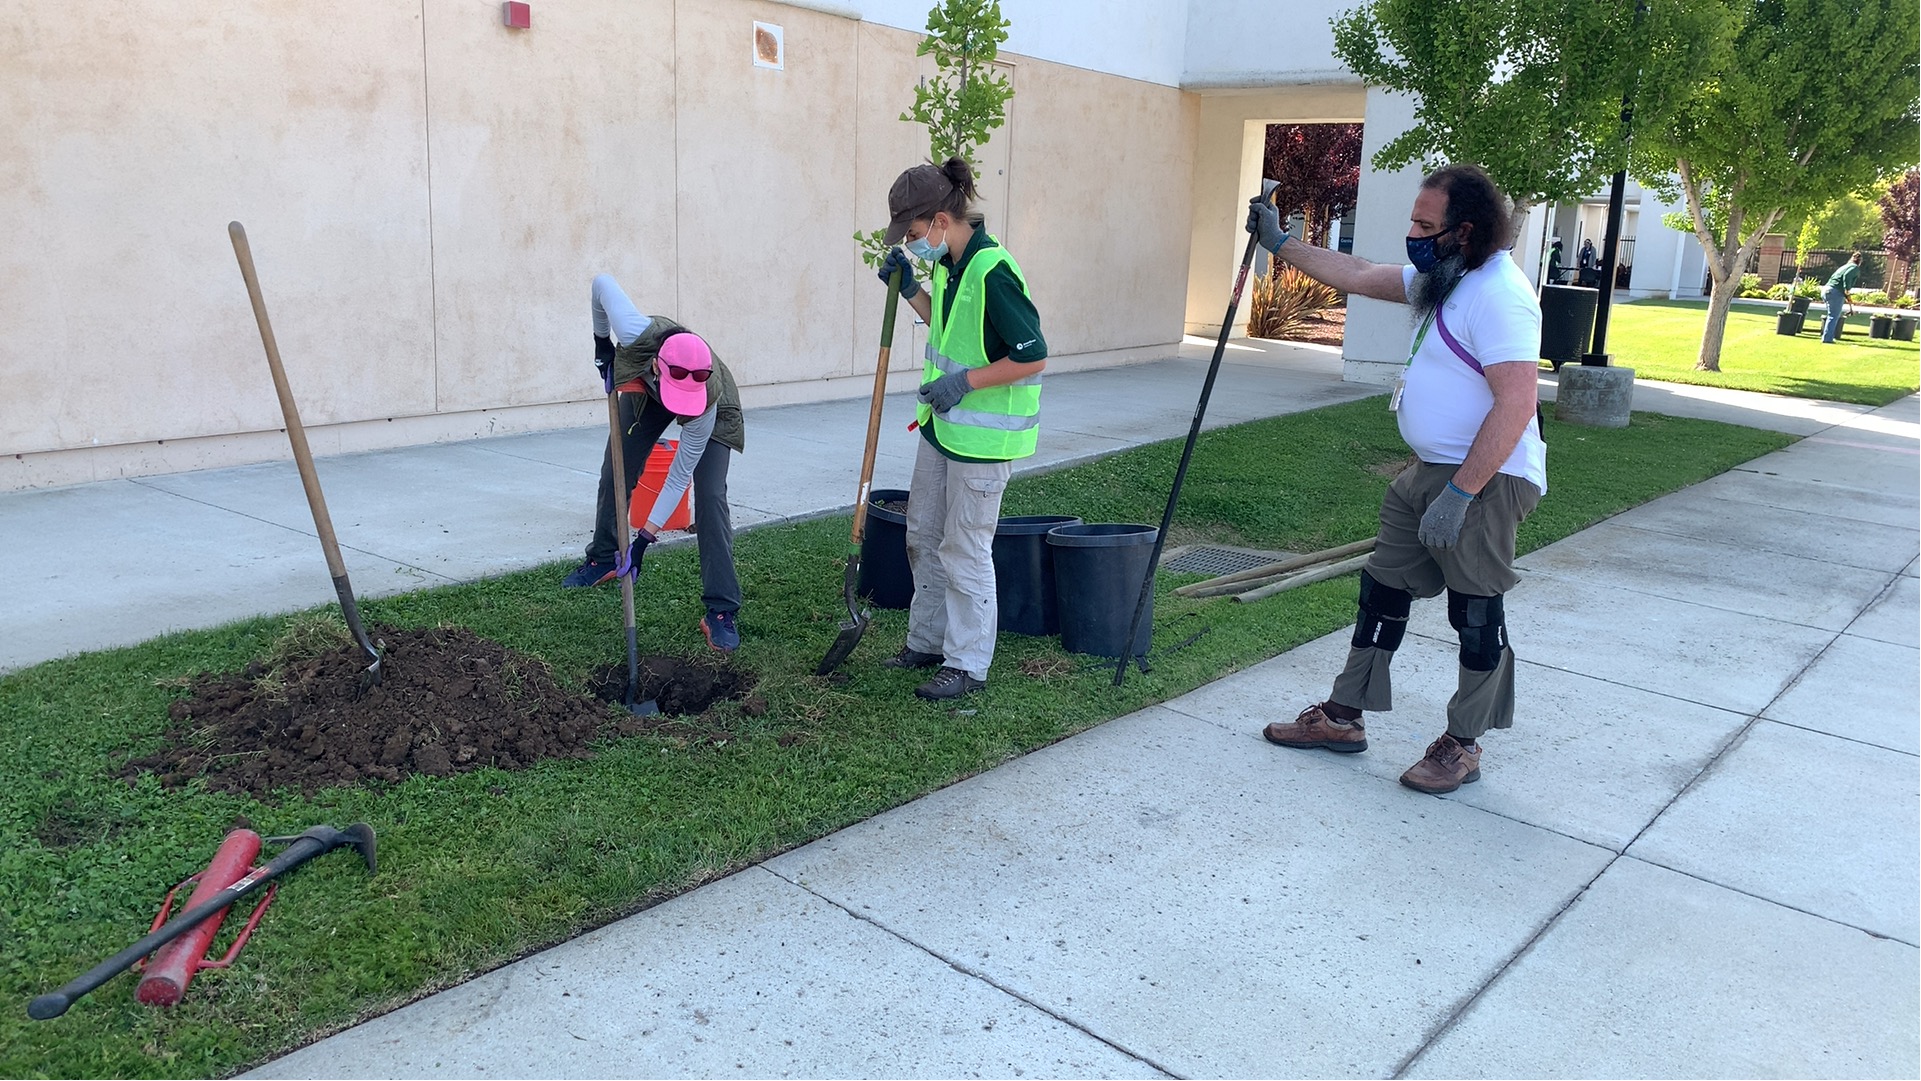 Staff digging a hole to plant trees for Arbor Day